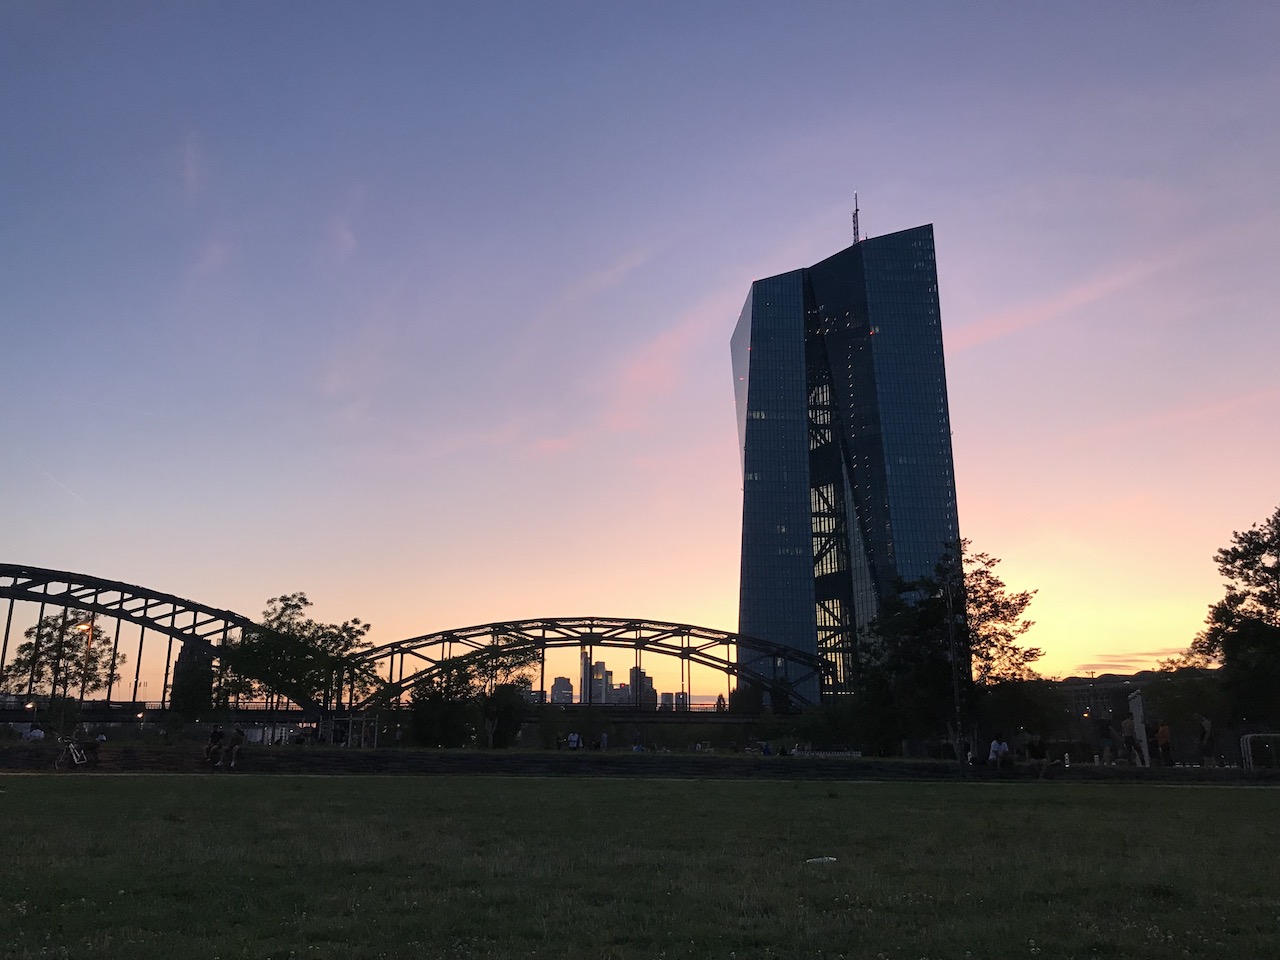 Sunset behind the European Central Bank in Frankfurt am Main, Germany. Photo by @twsbanter